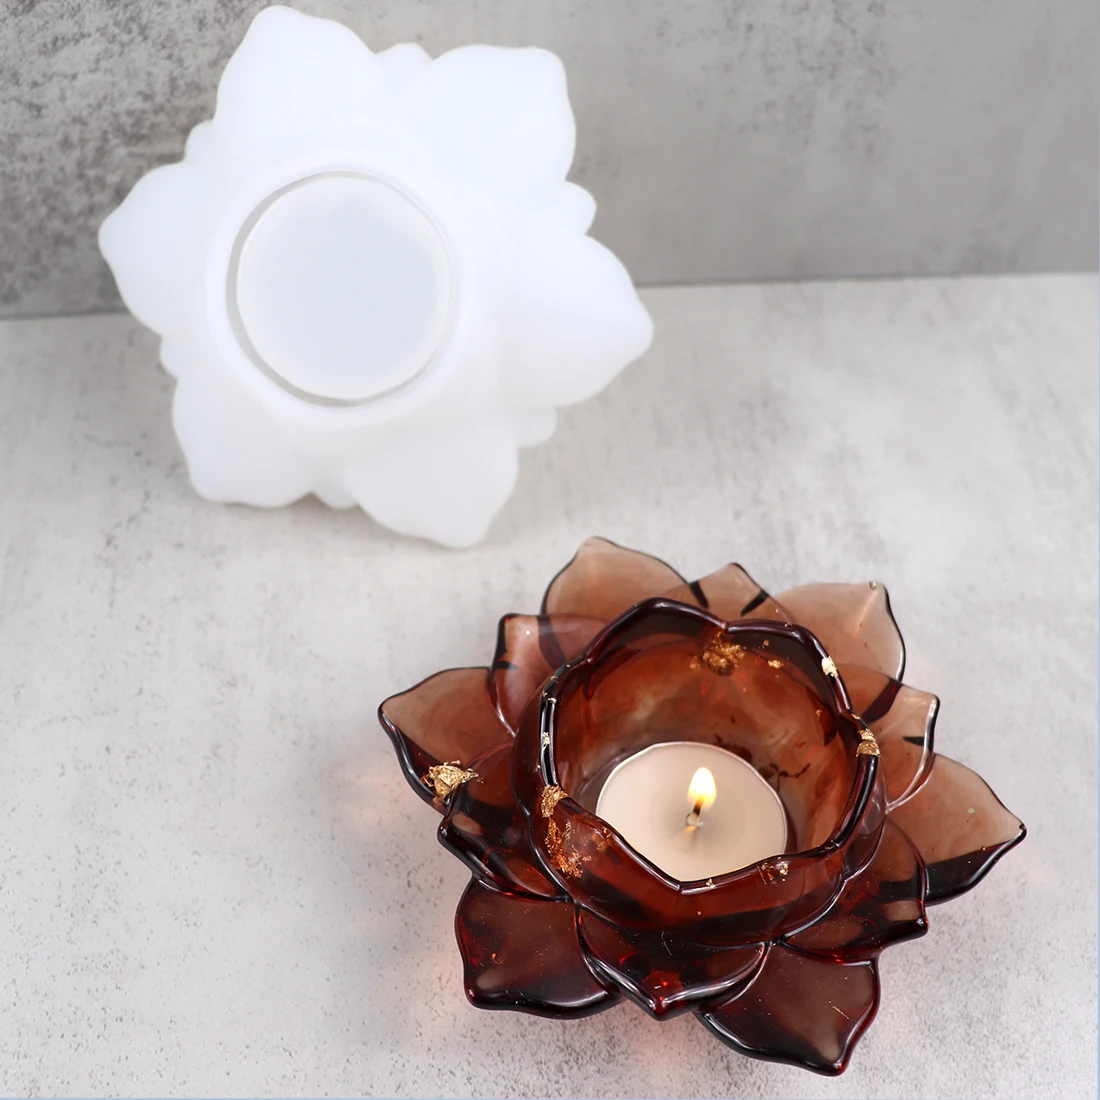 

DIY 3D Lotus Candle Holder Silicone Mold Wax Mould Clay Epoxy Resin Craft Making Homemade Storage Box Molds Tool Home Decoration